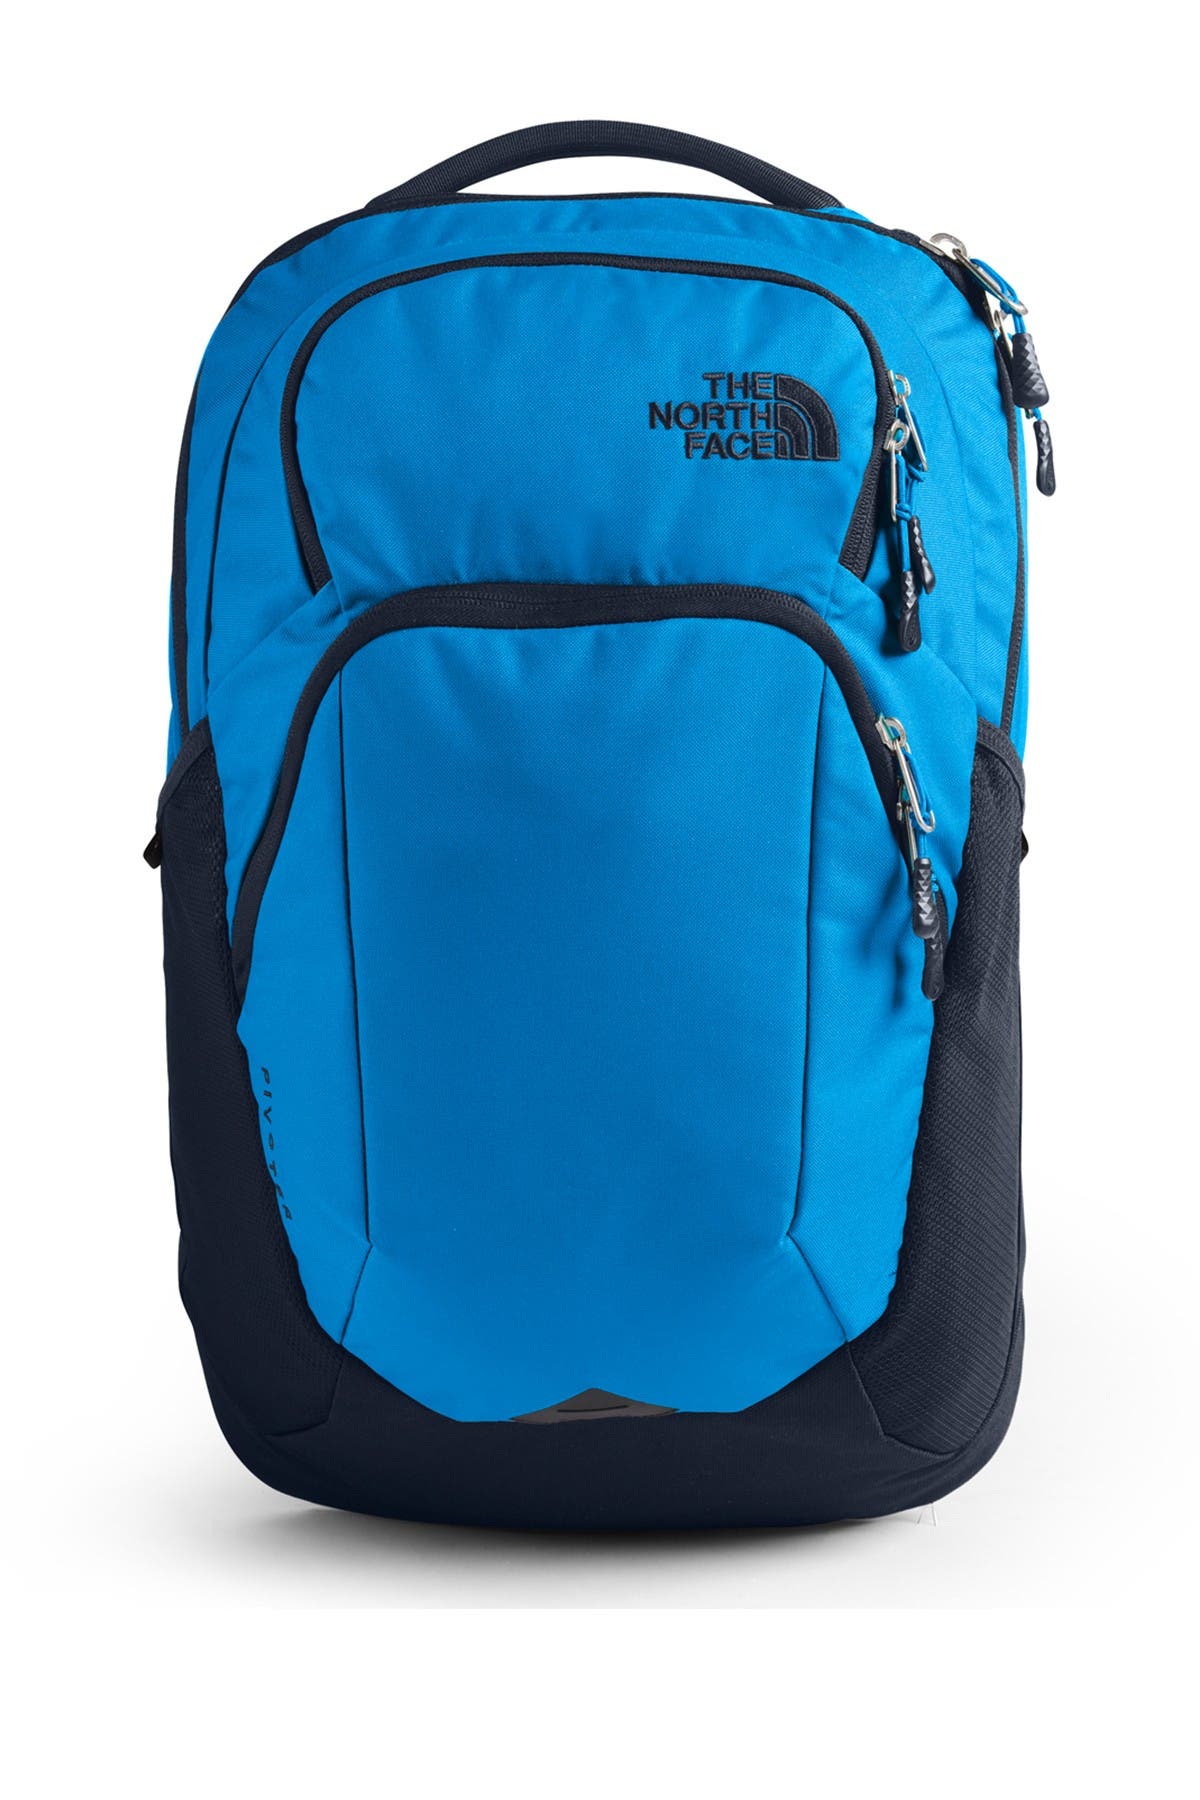 The North Face | Pivoter Backpack 